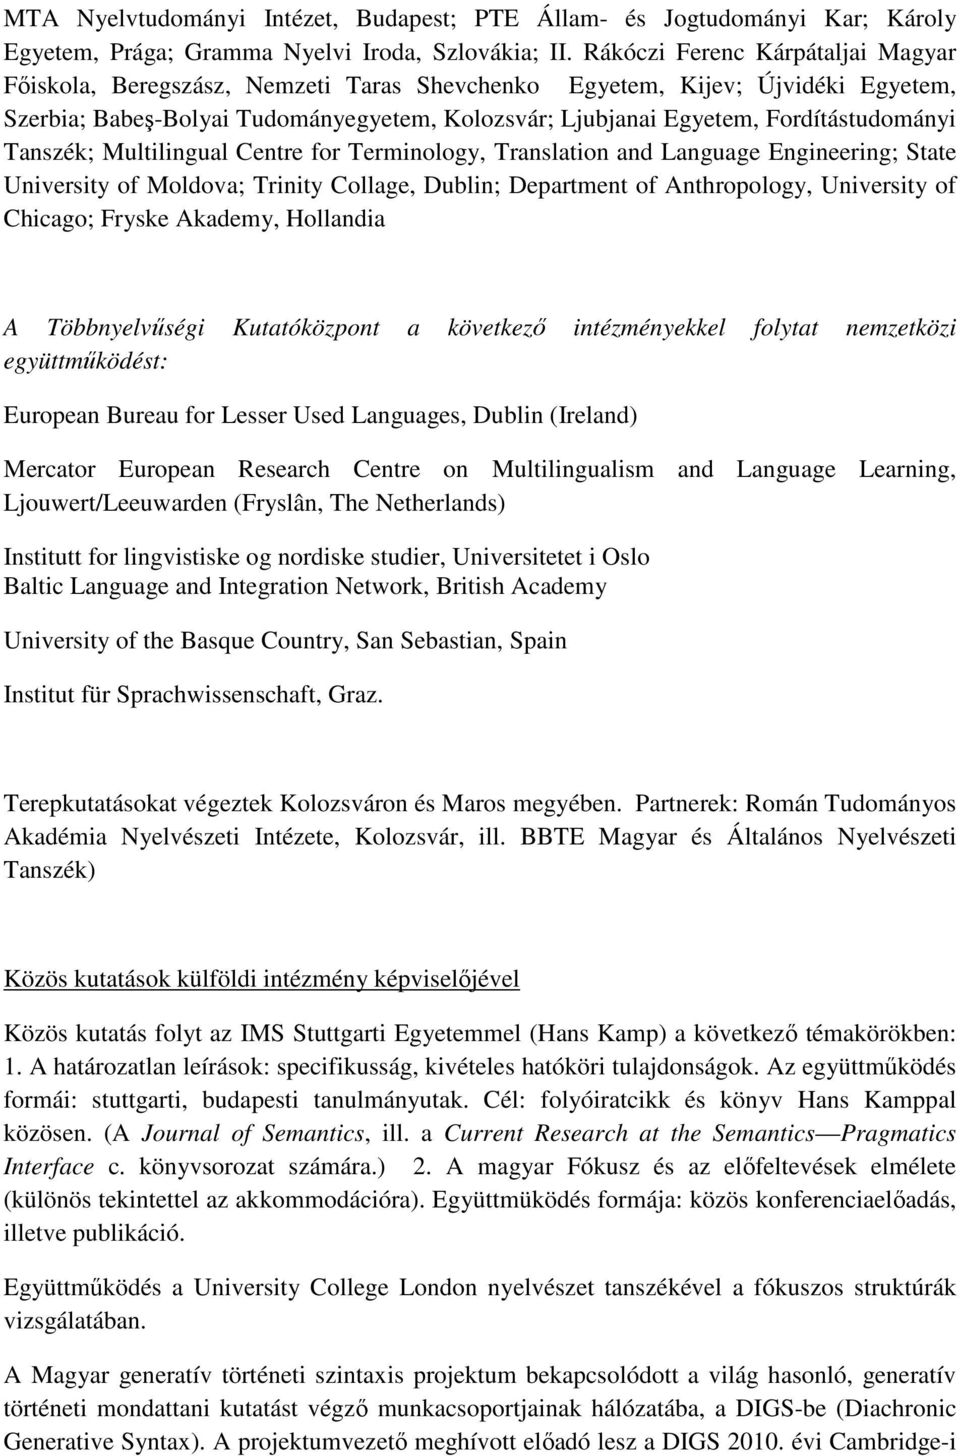 Fordítástudományi Tanszék; Multilingual Centre for Terminology, Translation and Language Engineering; State University of Moldova; Trinity Collage, Dublin; Department of Anthropology, University of